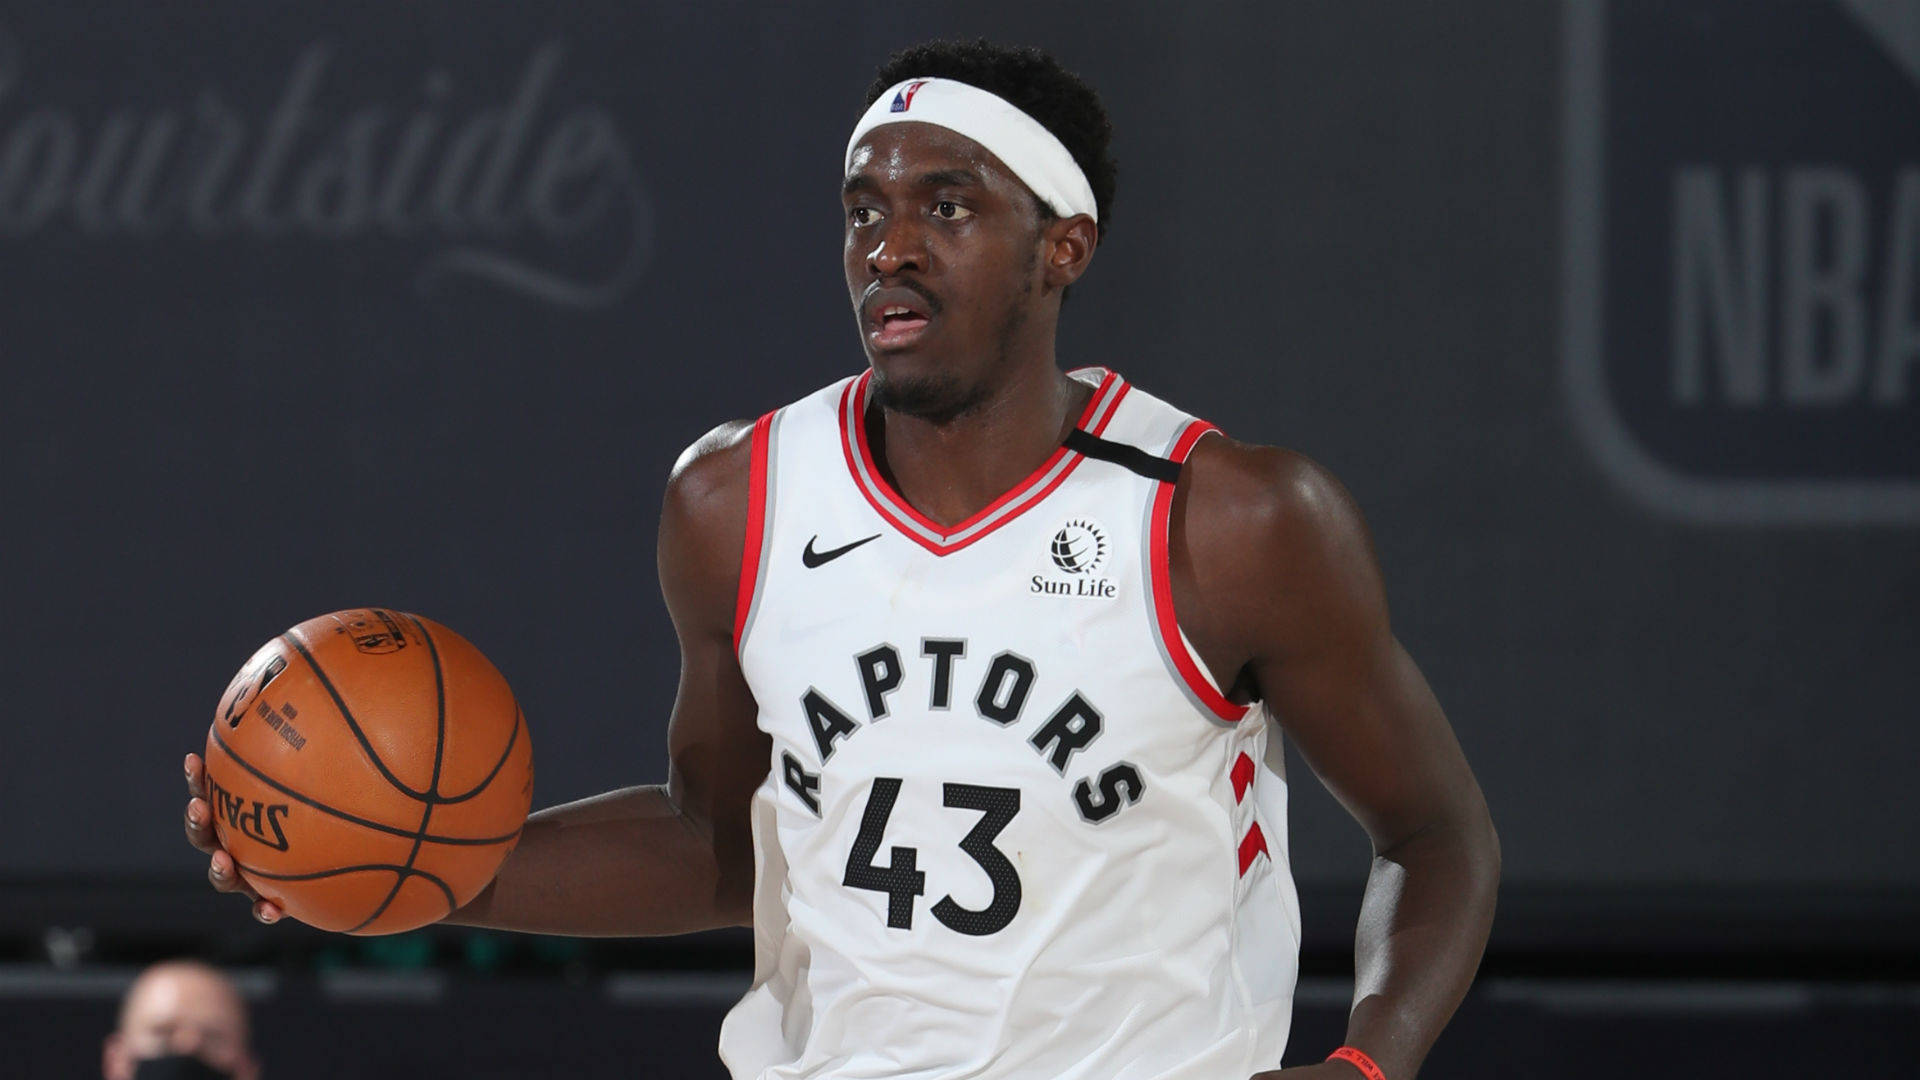 Pascal Siakam In White Jersey